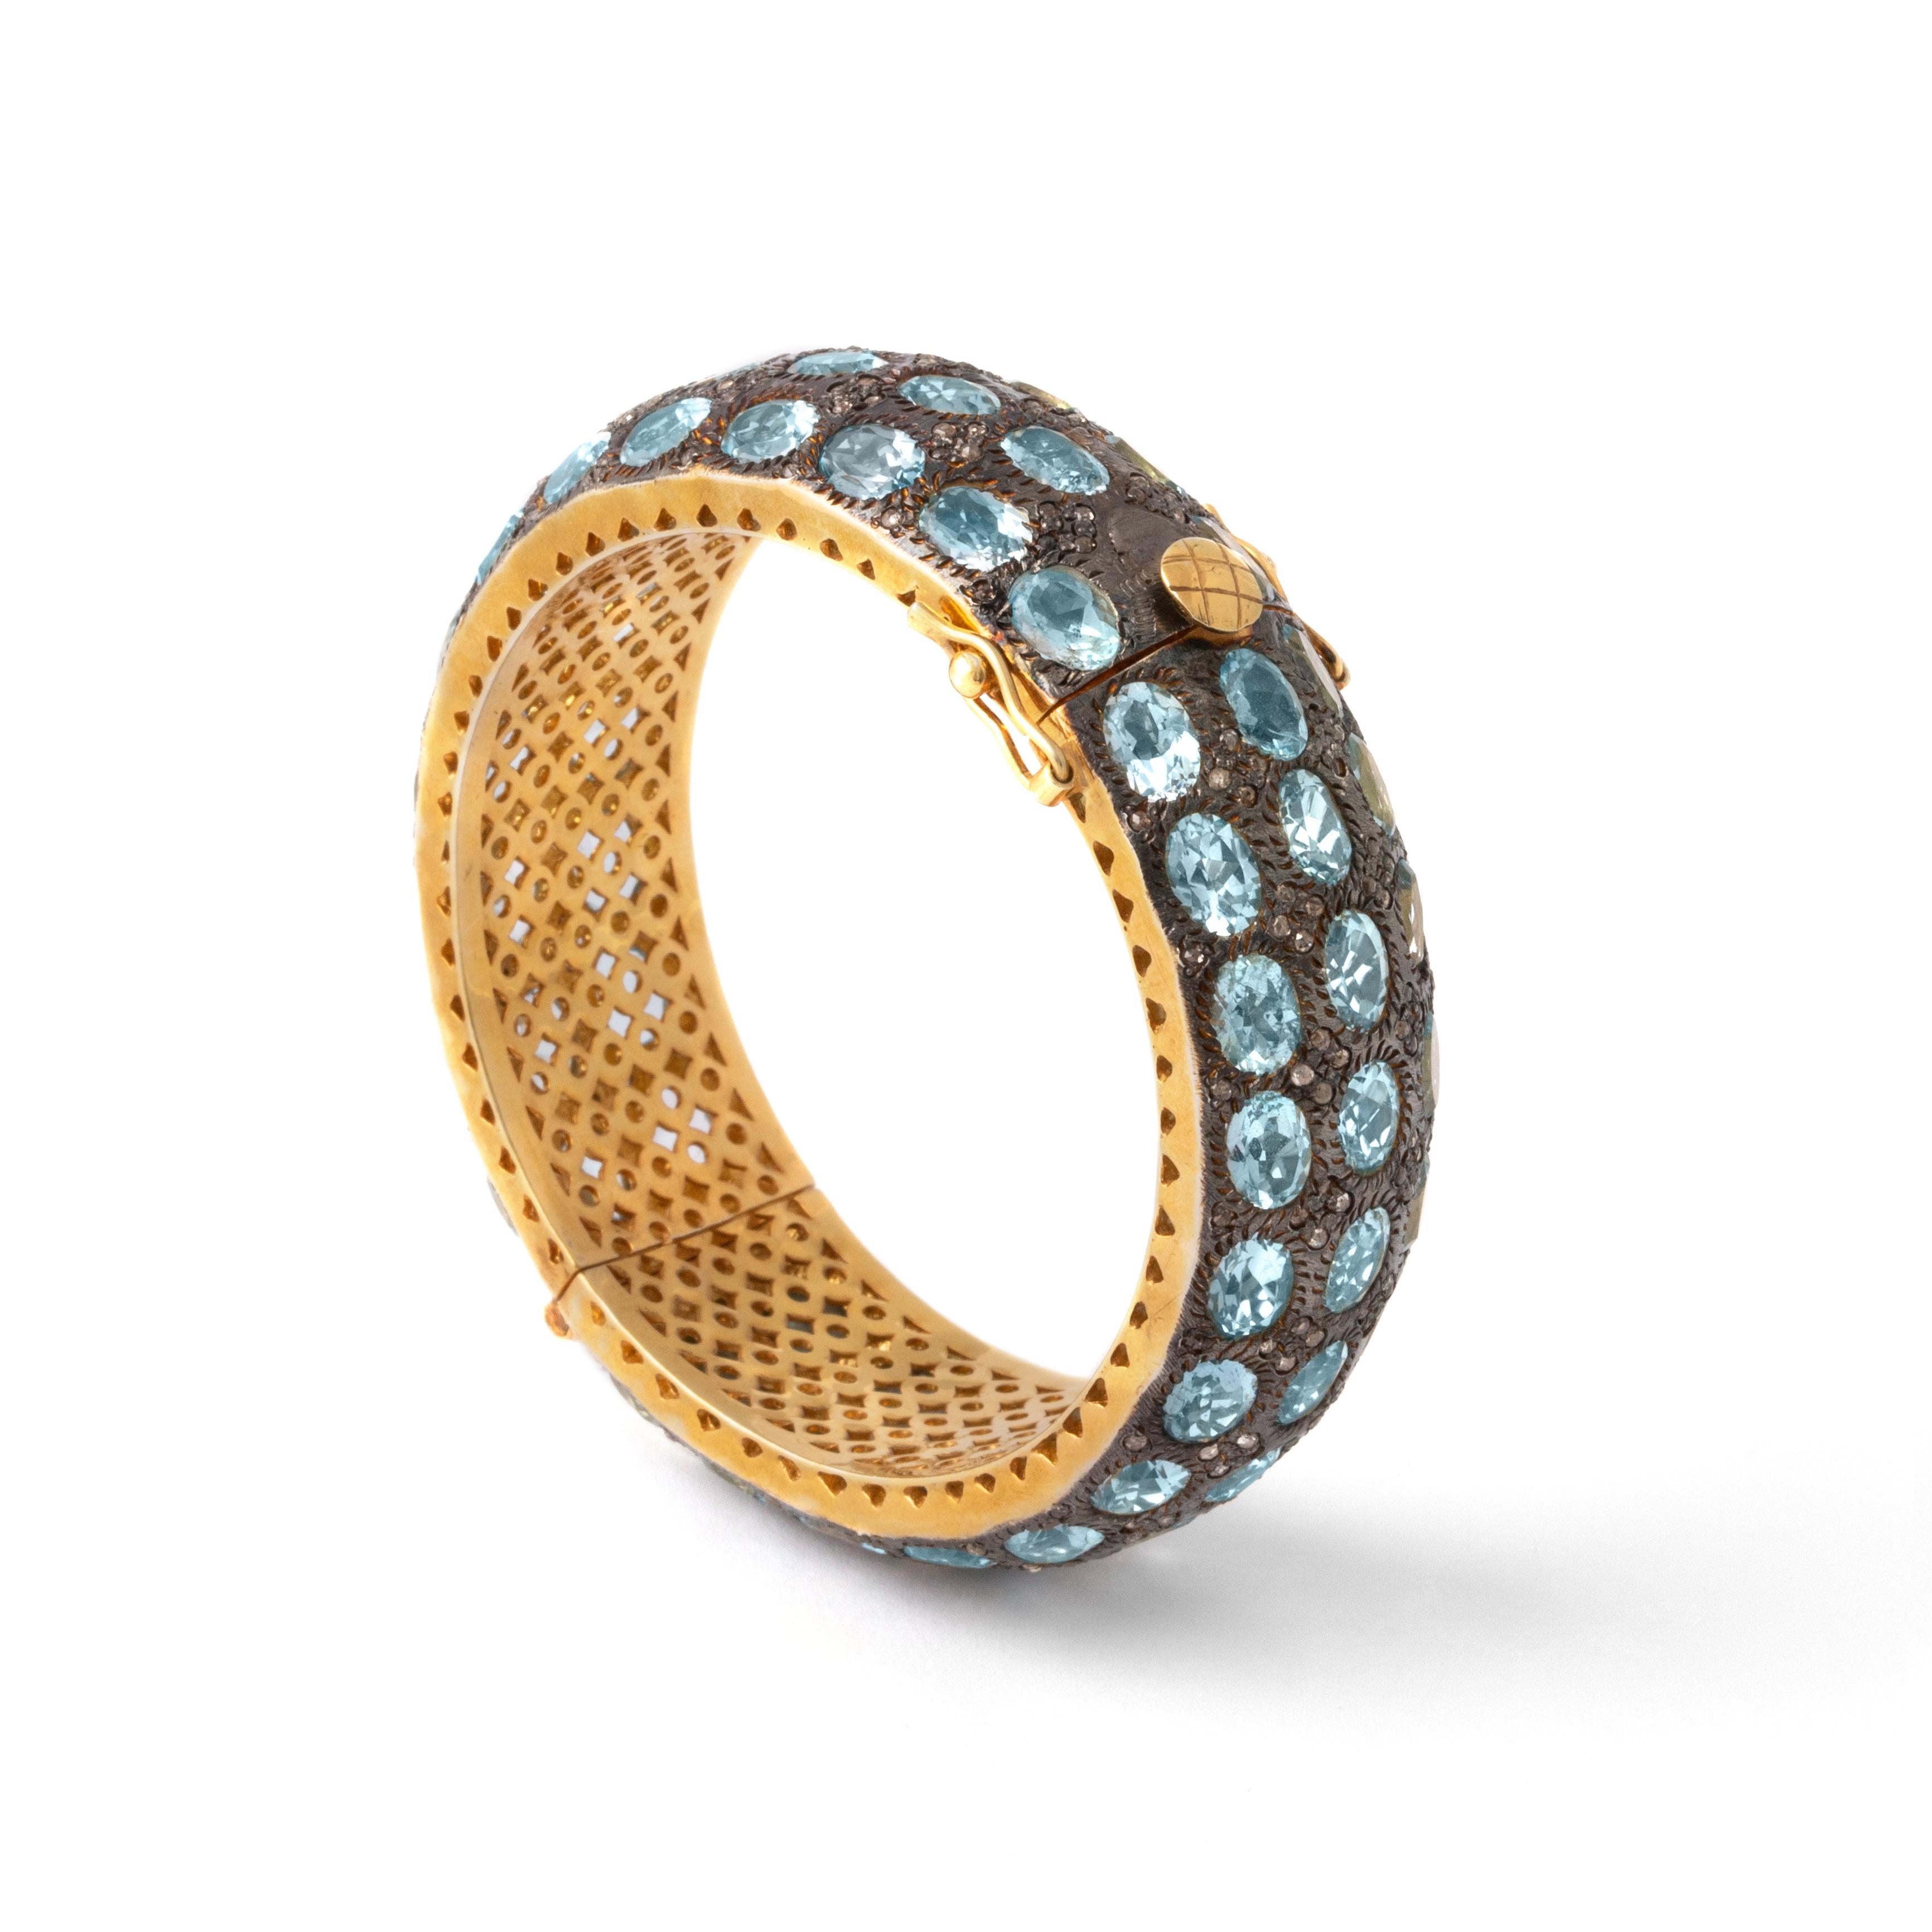 Elegance meets sophistication in our Aquamarine Oval Cut Gold Bangle Bracelet—a stunning embodiment of refined style.

The focal point of this exquisite piece is the mesmerizing oval-cut aquamarine, radiating a tranquil blue hue reminiscent of